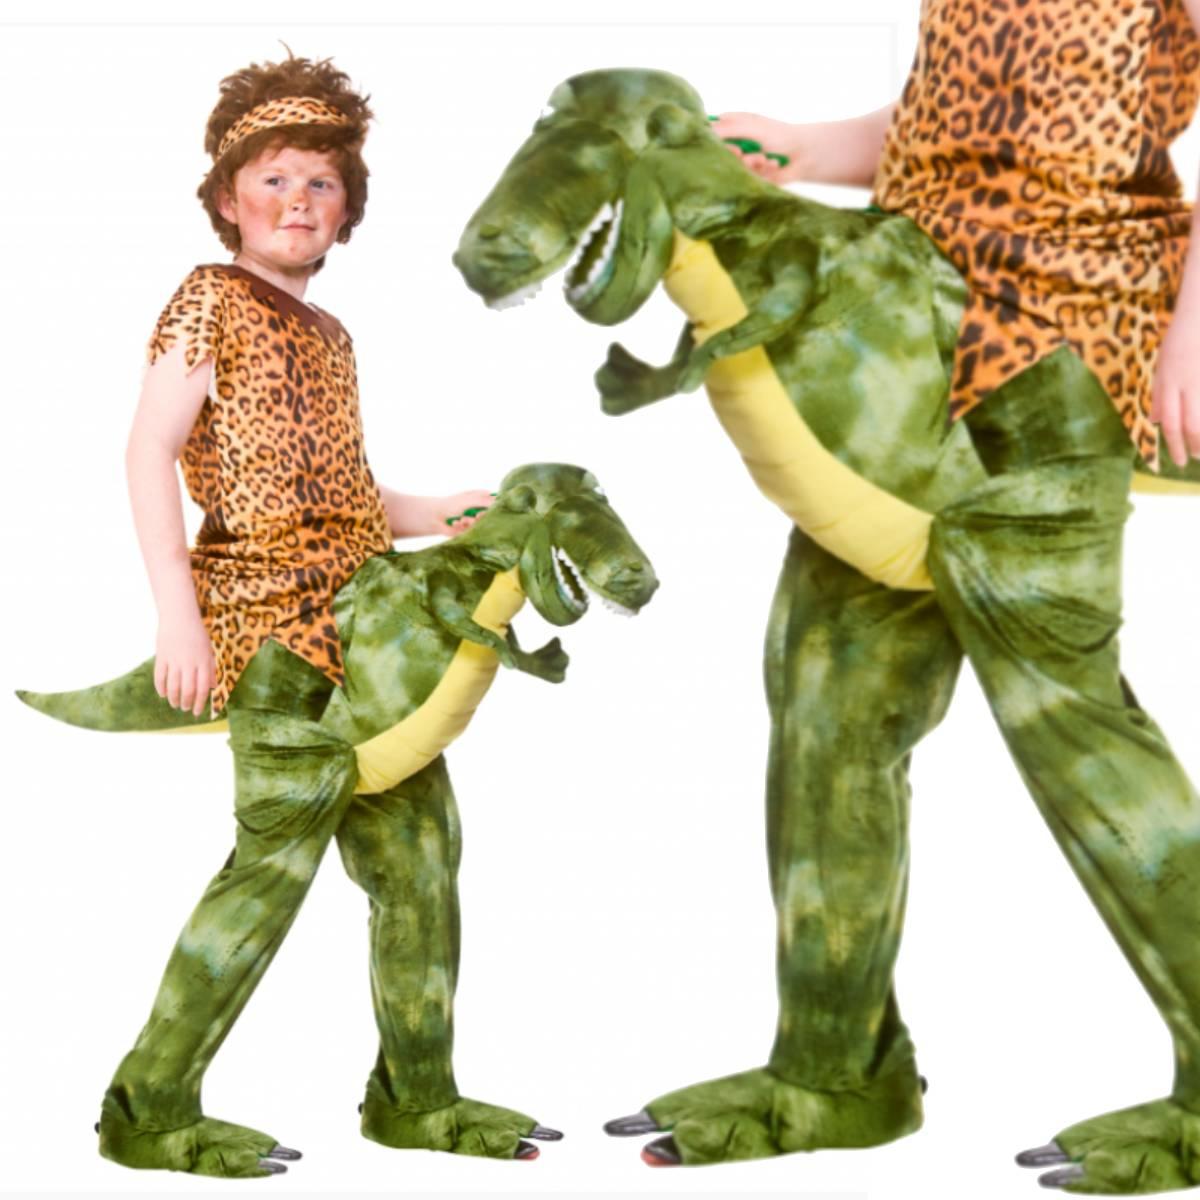 Ride in Dinosaur Fancy Dress Costume by Wicked KA-5920 available here at Karnival Costumes online party shop